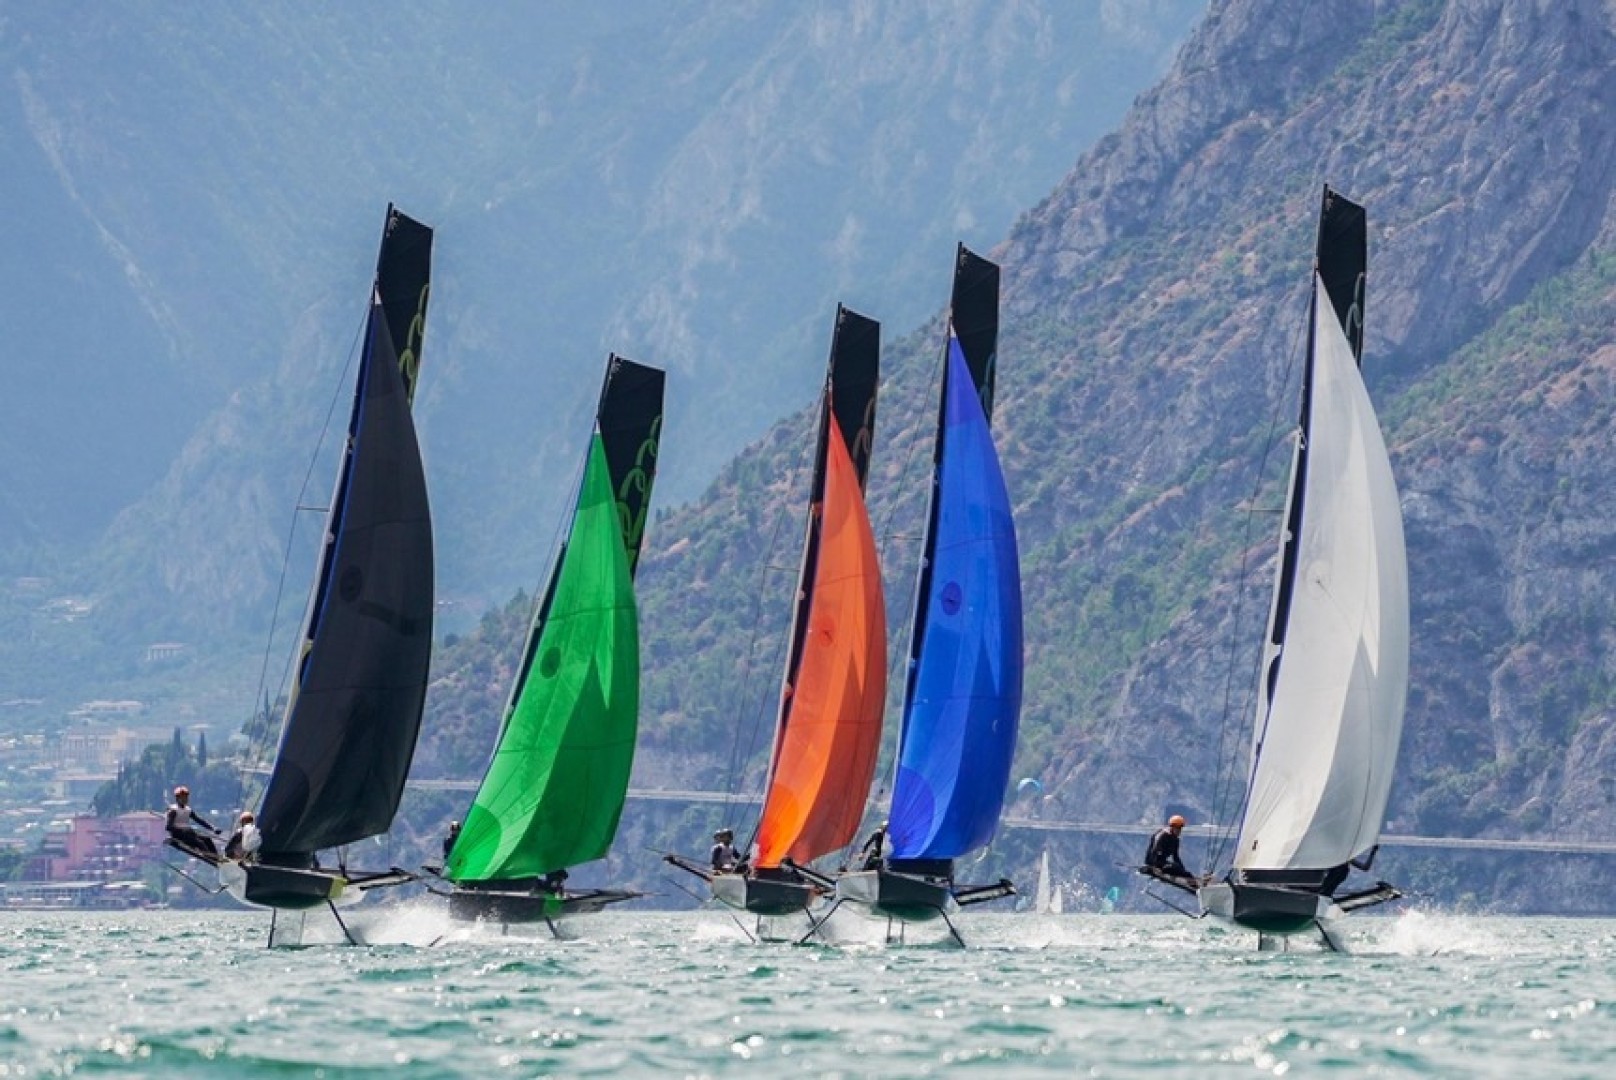 The Foil Academy FIV powered by Luna Rossa makes a stop on Lake Garda